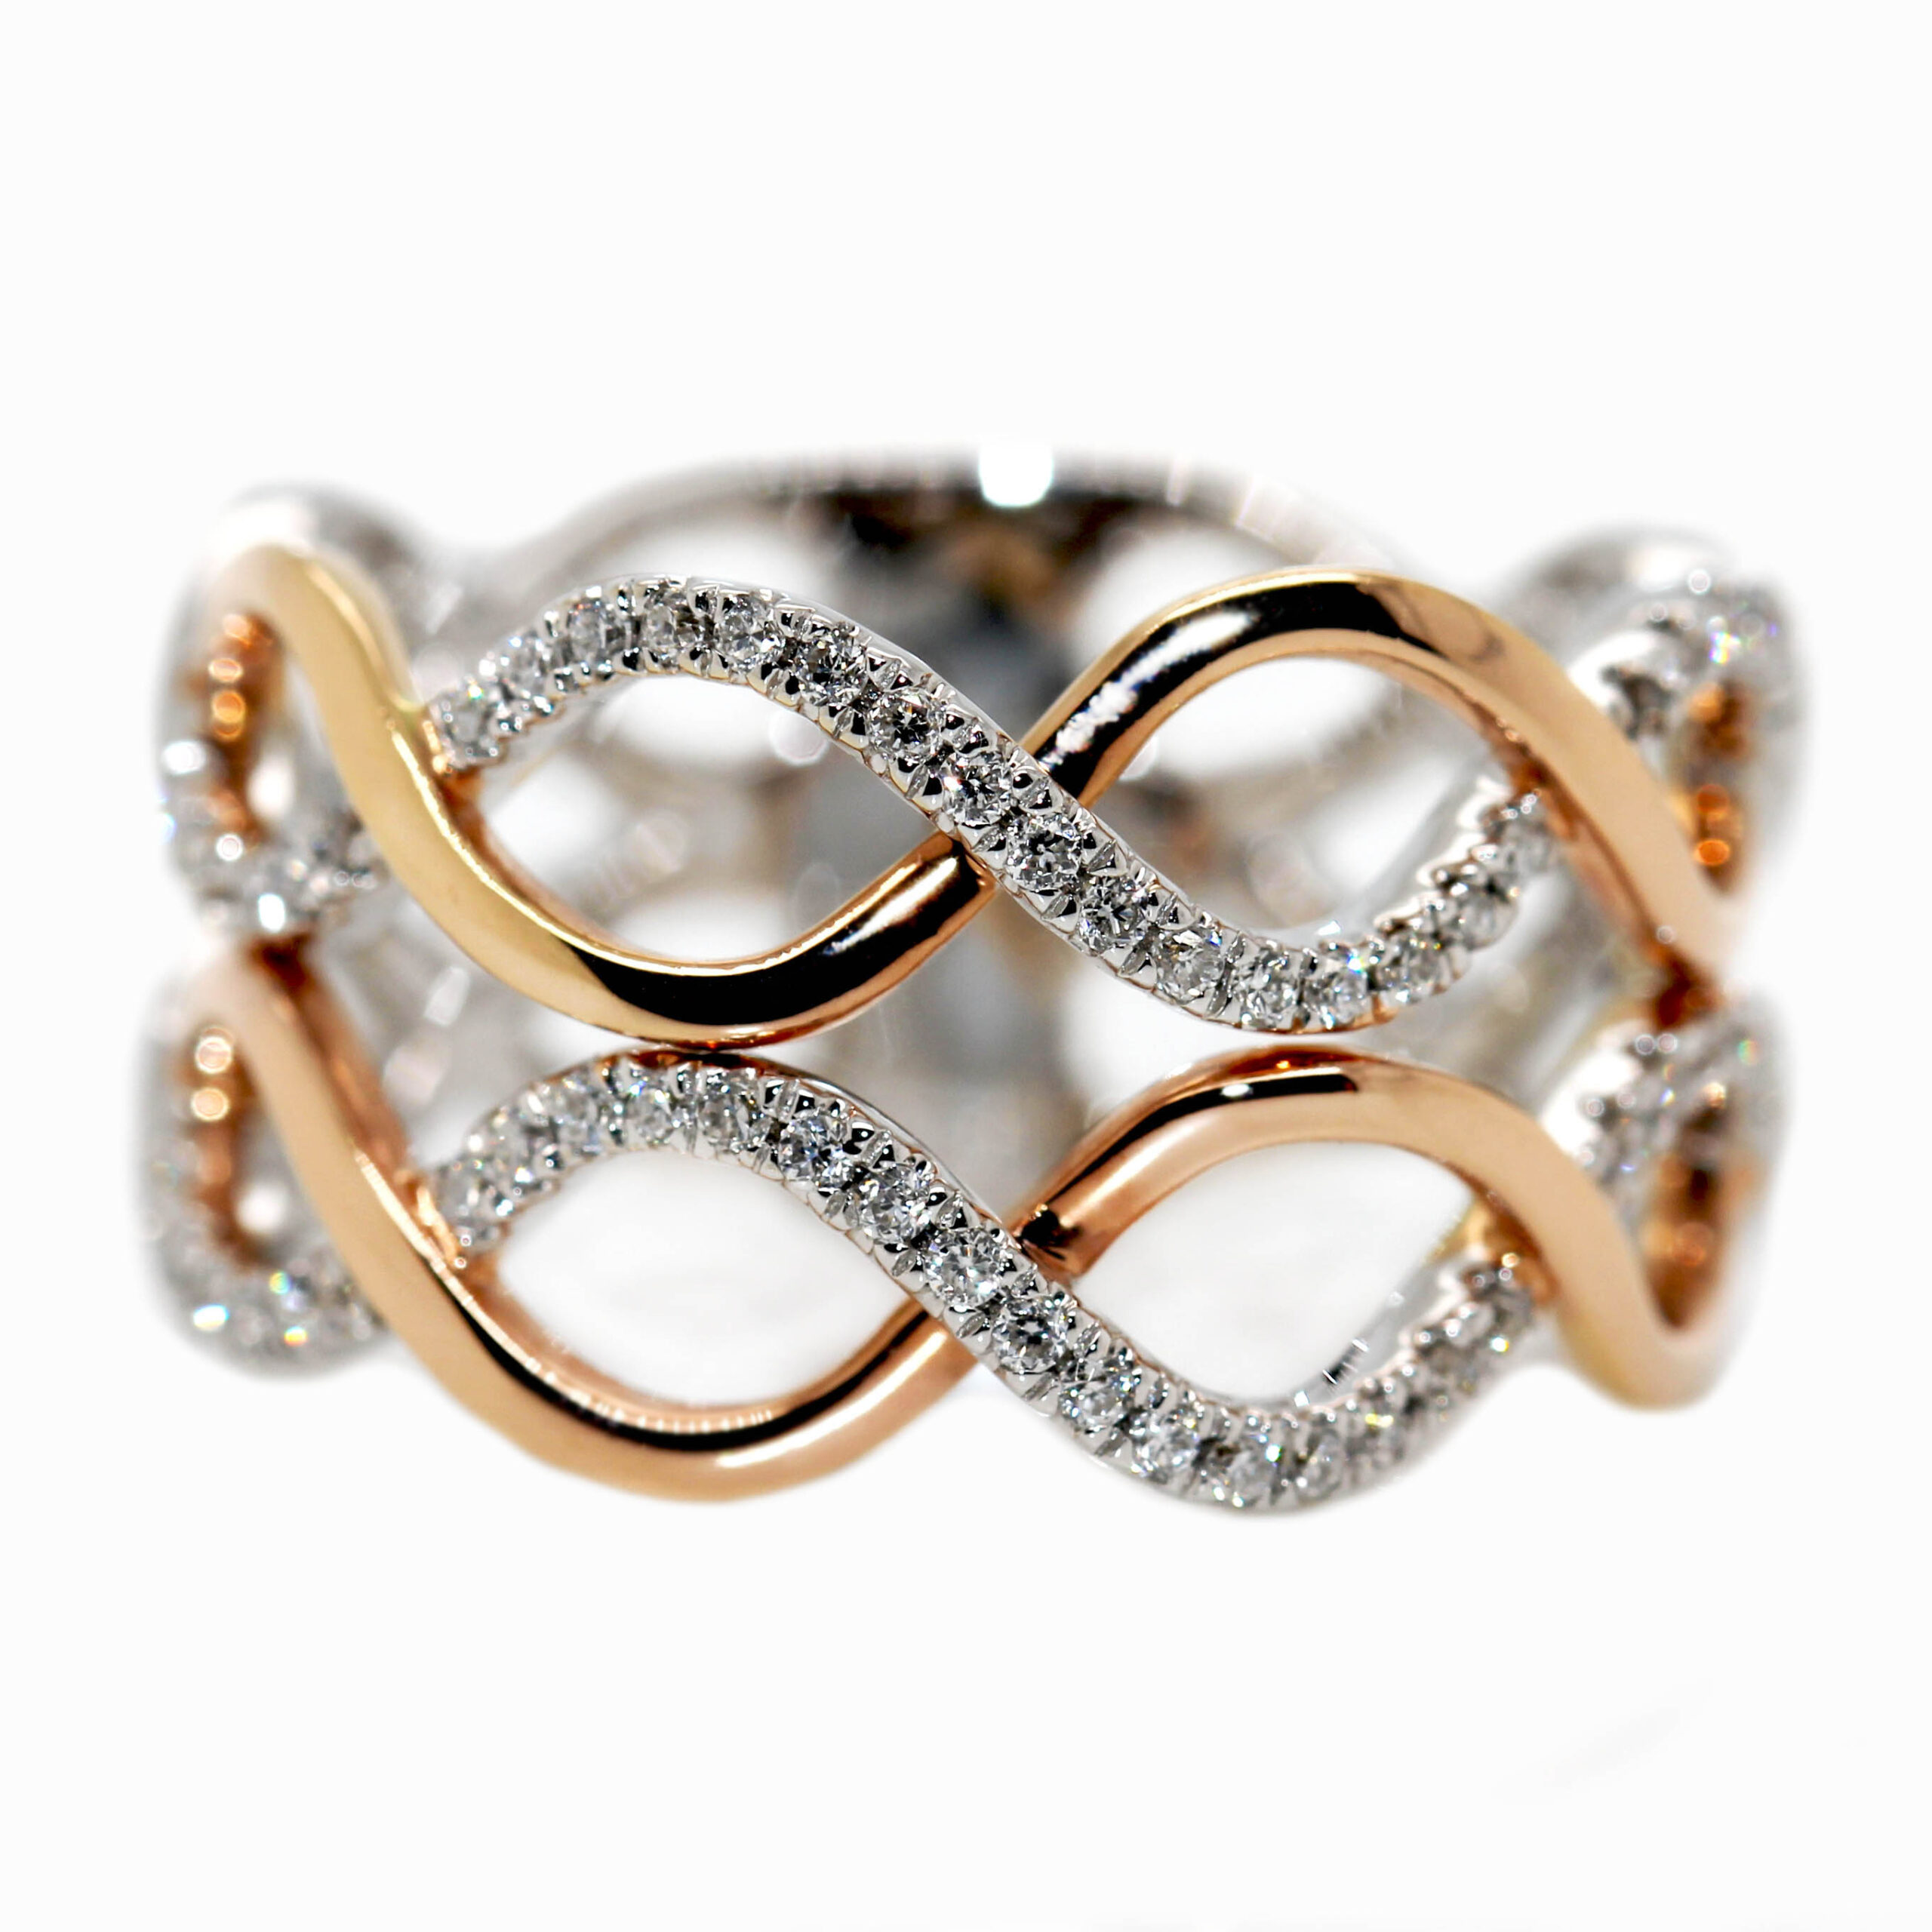 clayfield jewellery gold and diamond rings